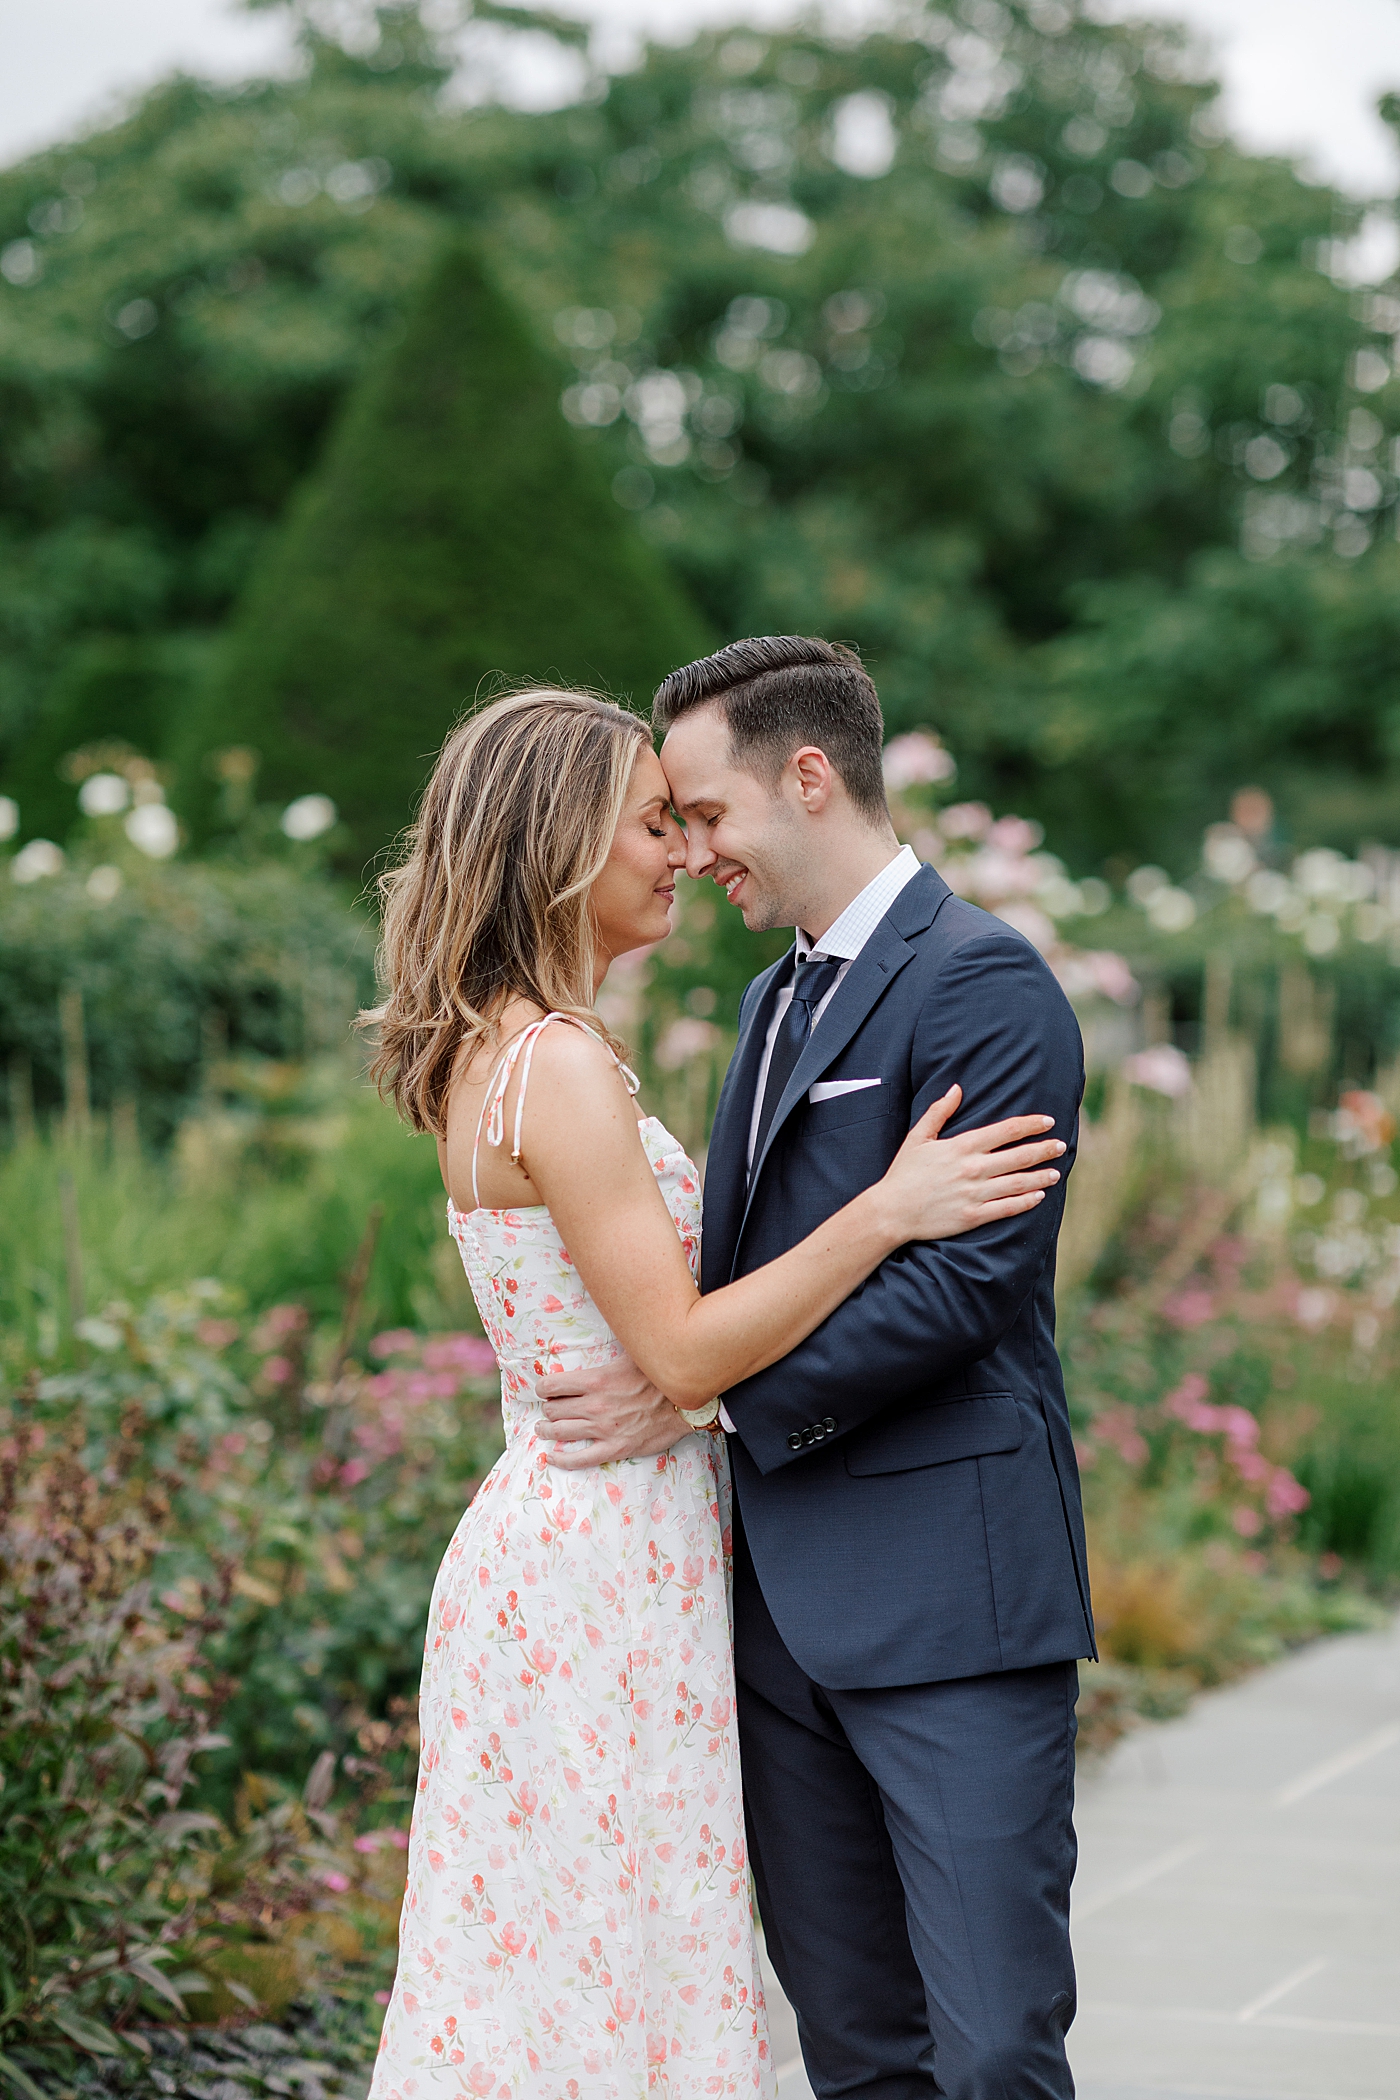 Couple embracing in a park with flowers blooming behind them | Engagement Session Guides by Hope Helmuth Photography